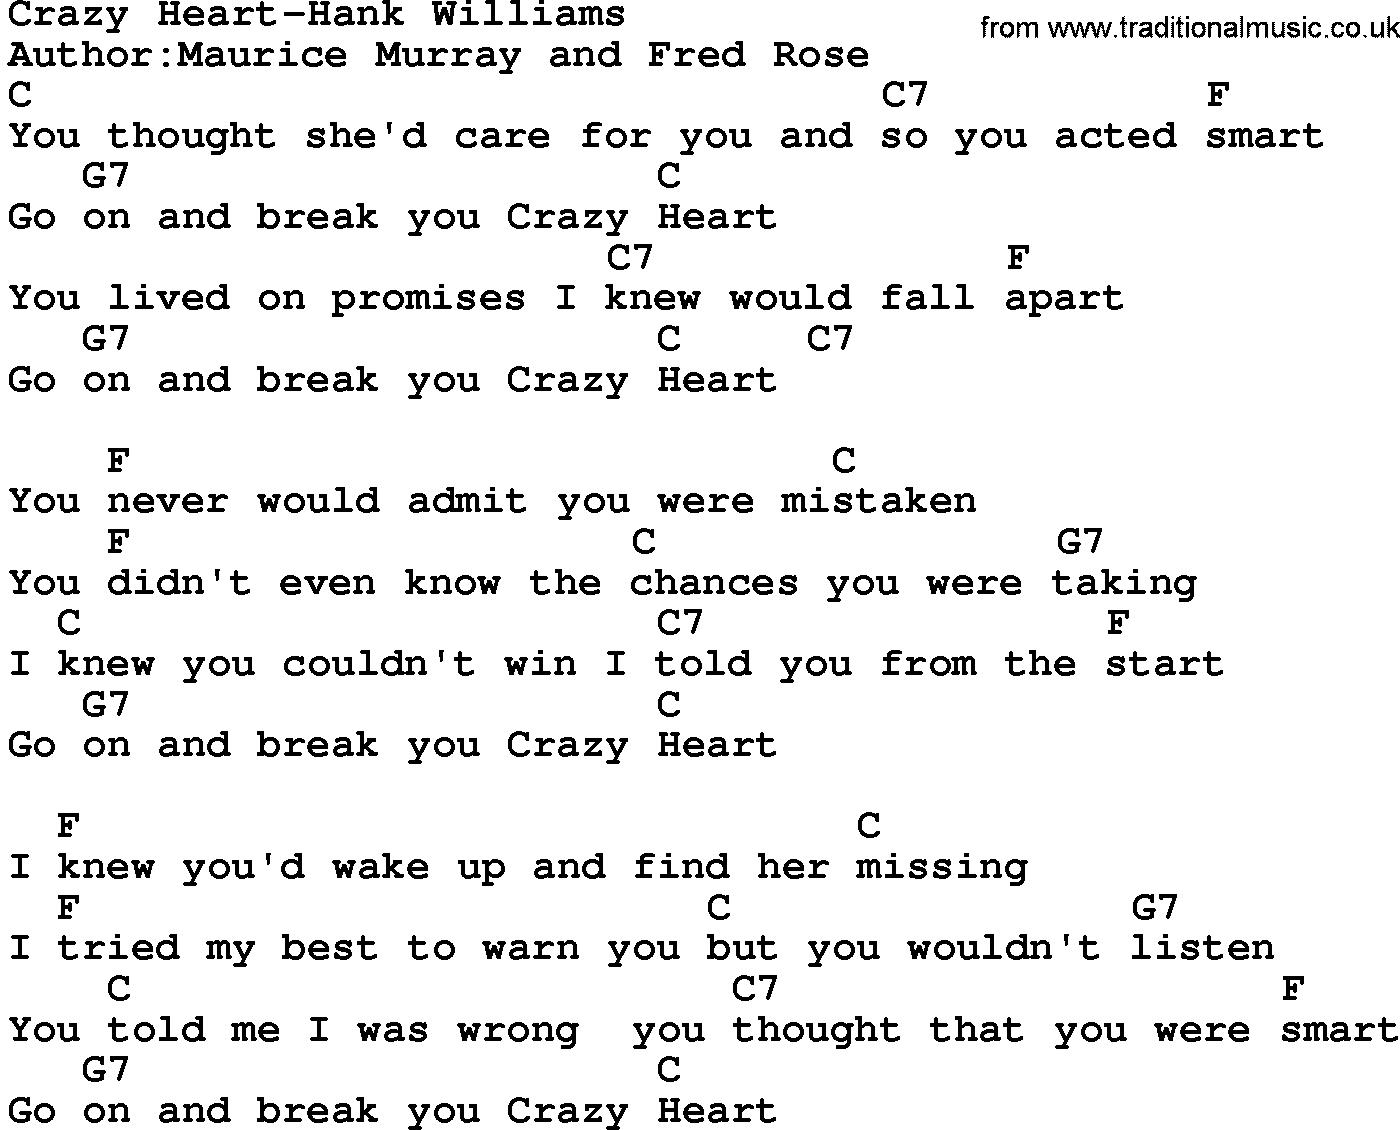 Country music song: Crazy Heart-Hank Williams lyrics and chords